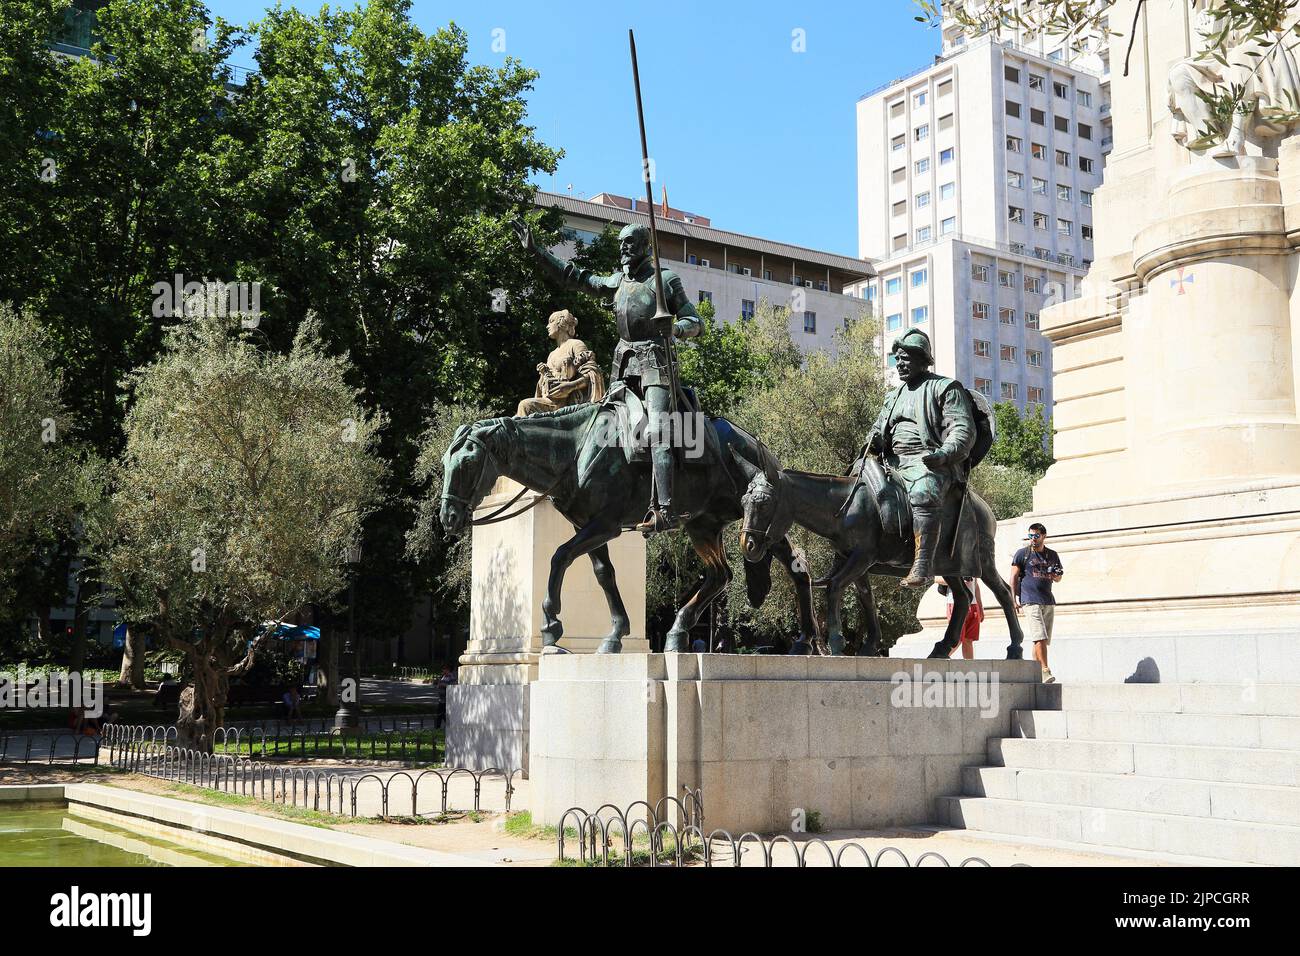 MADRID, SPAIN - MAY 24, 2017: There are sculptures to the famous literary characters Don Quixote and Sancho Panza. Stock Photo